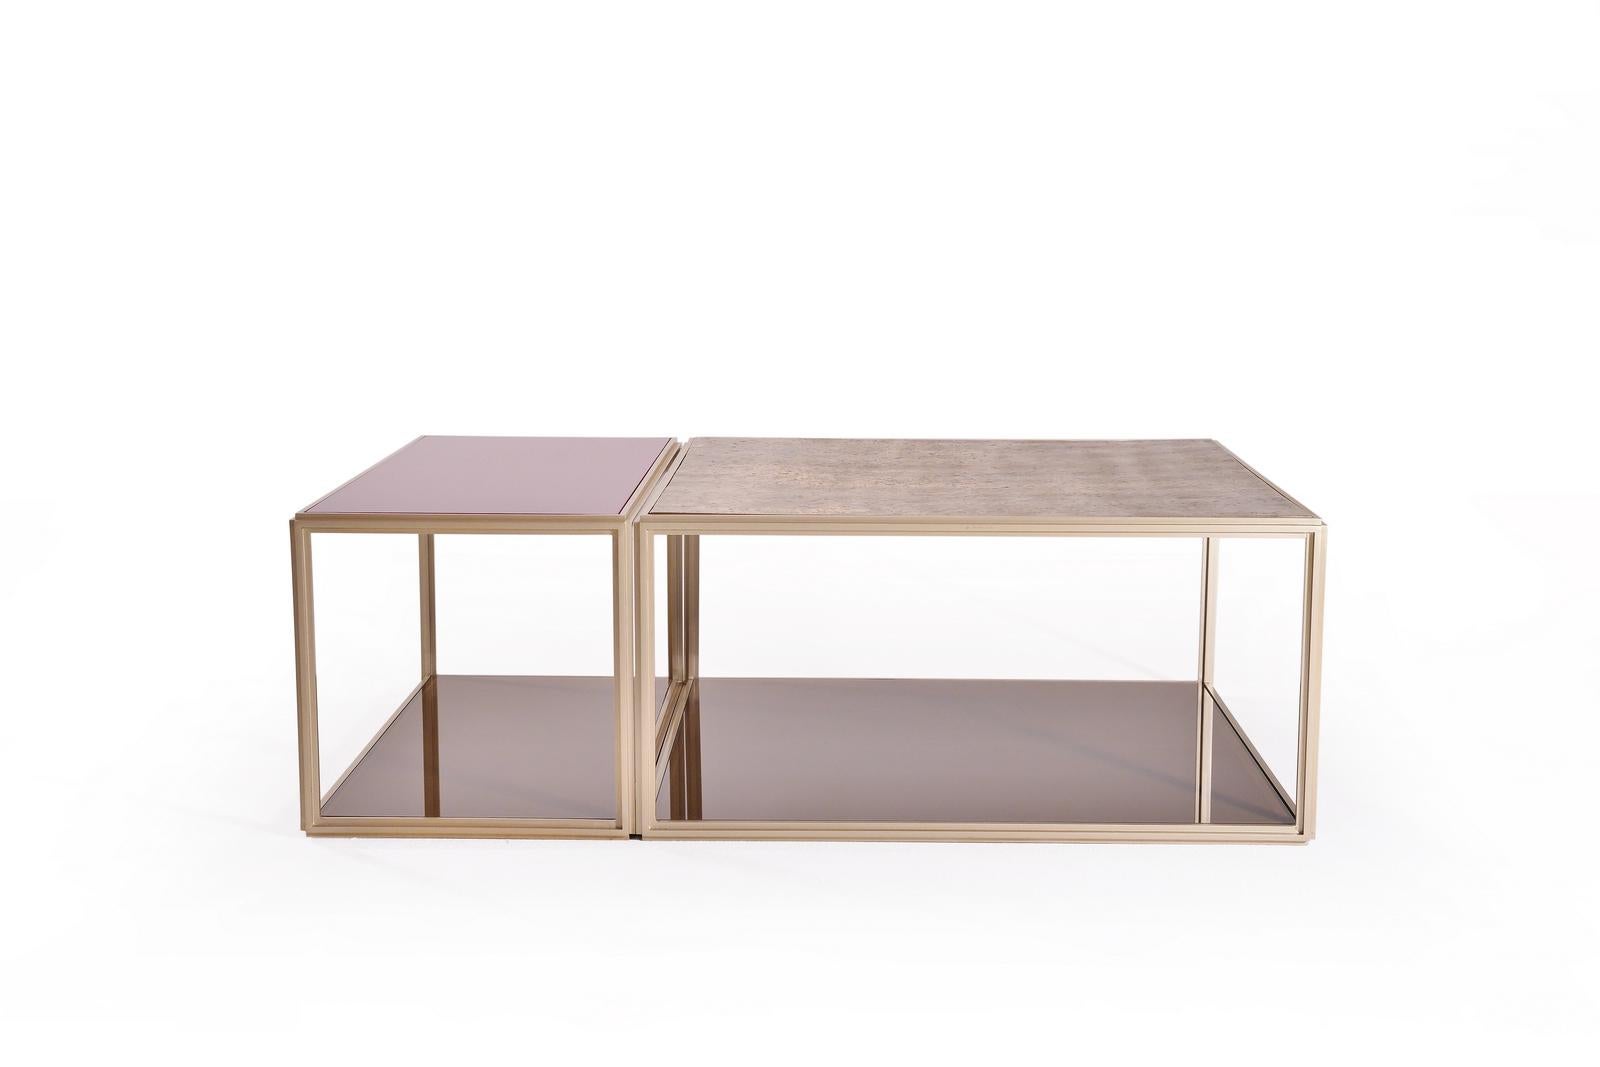 We love the play of contrast and textural richness in this custom version of our PT6 + PT7 brass low table made for our friend’s apartment in Paris.
 
Inspired by the modernists, we created this cubist table in extruded brushed brass and